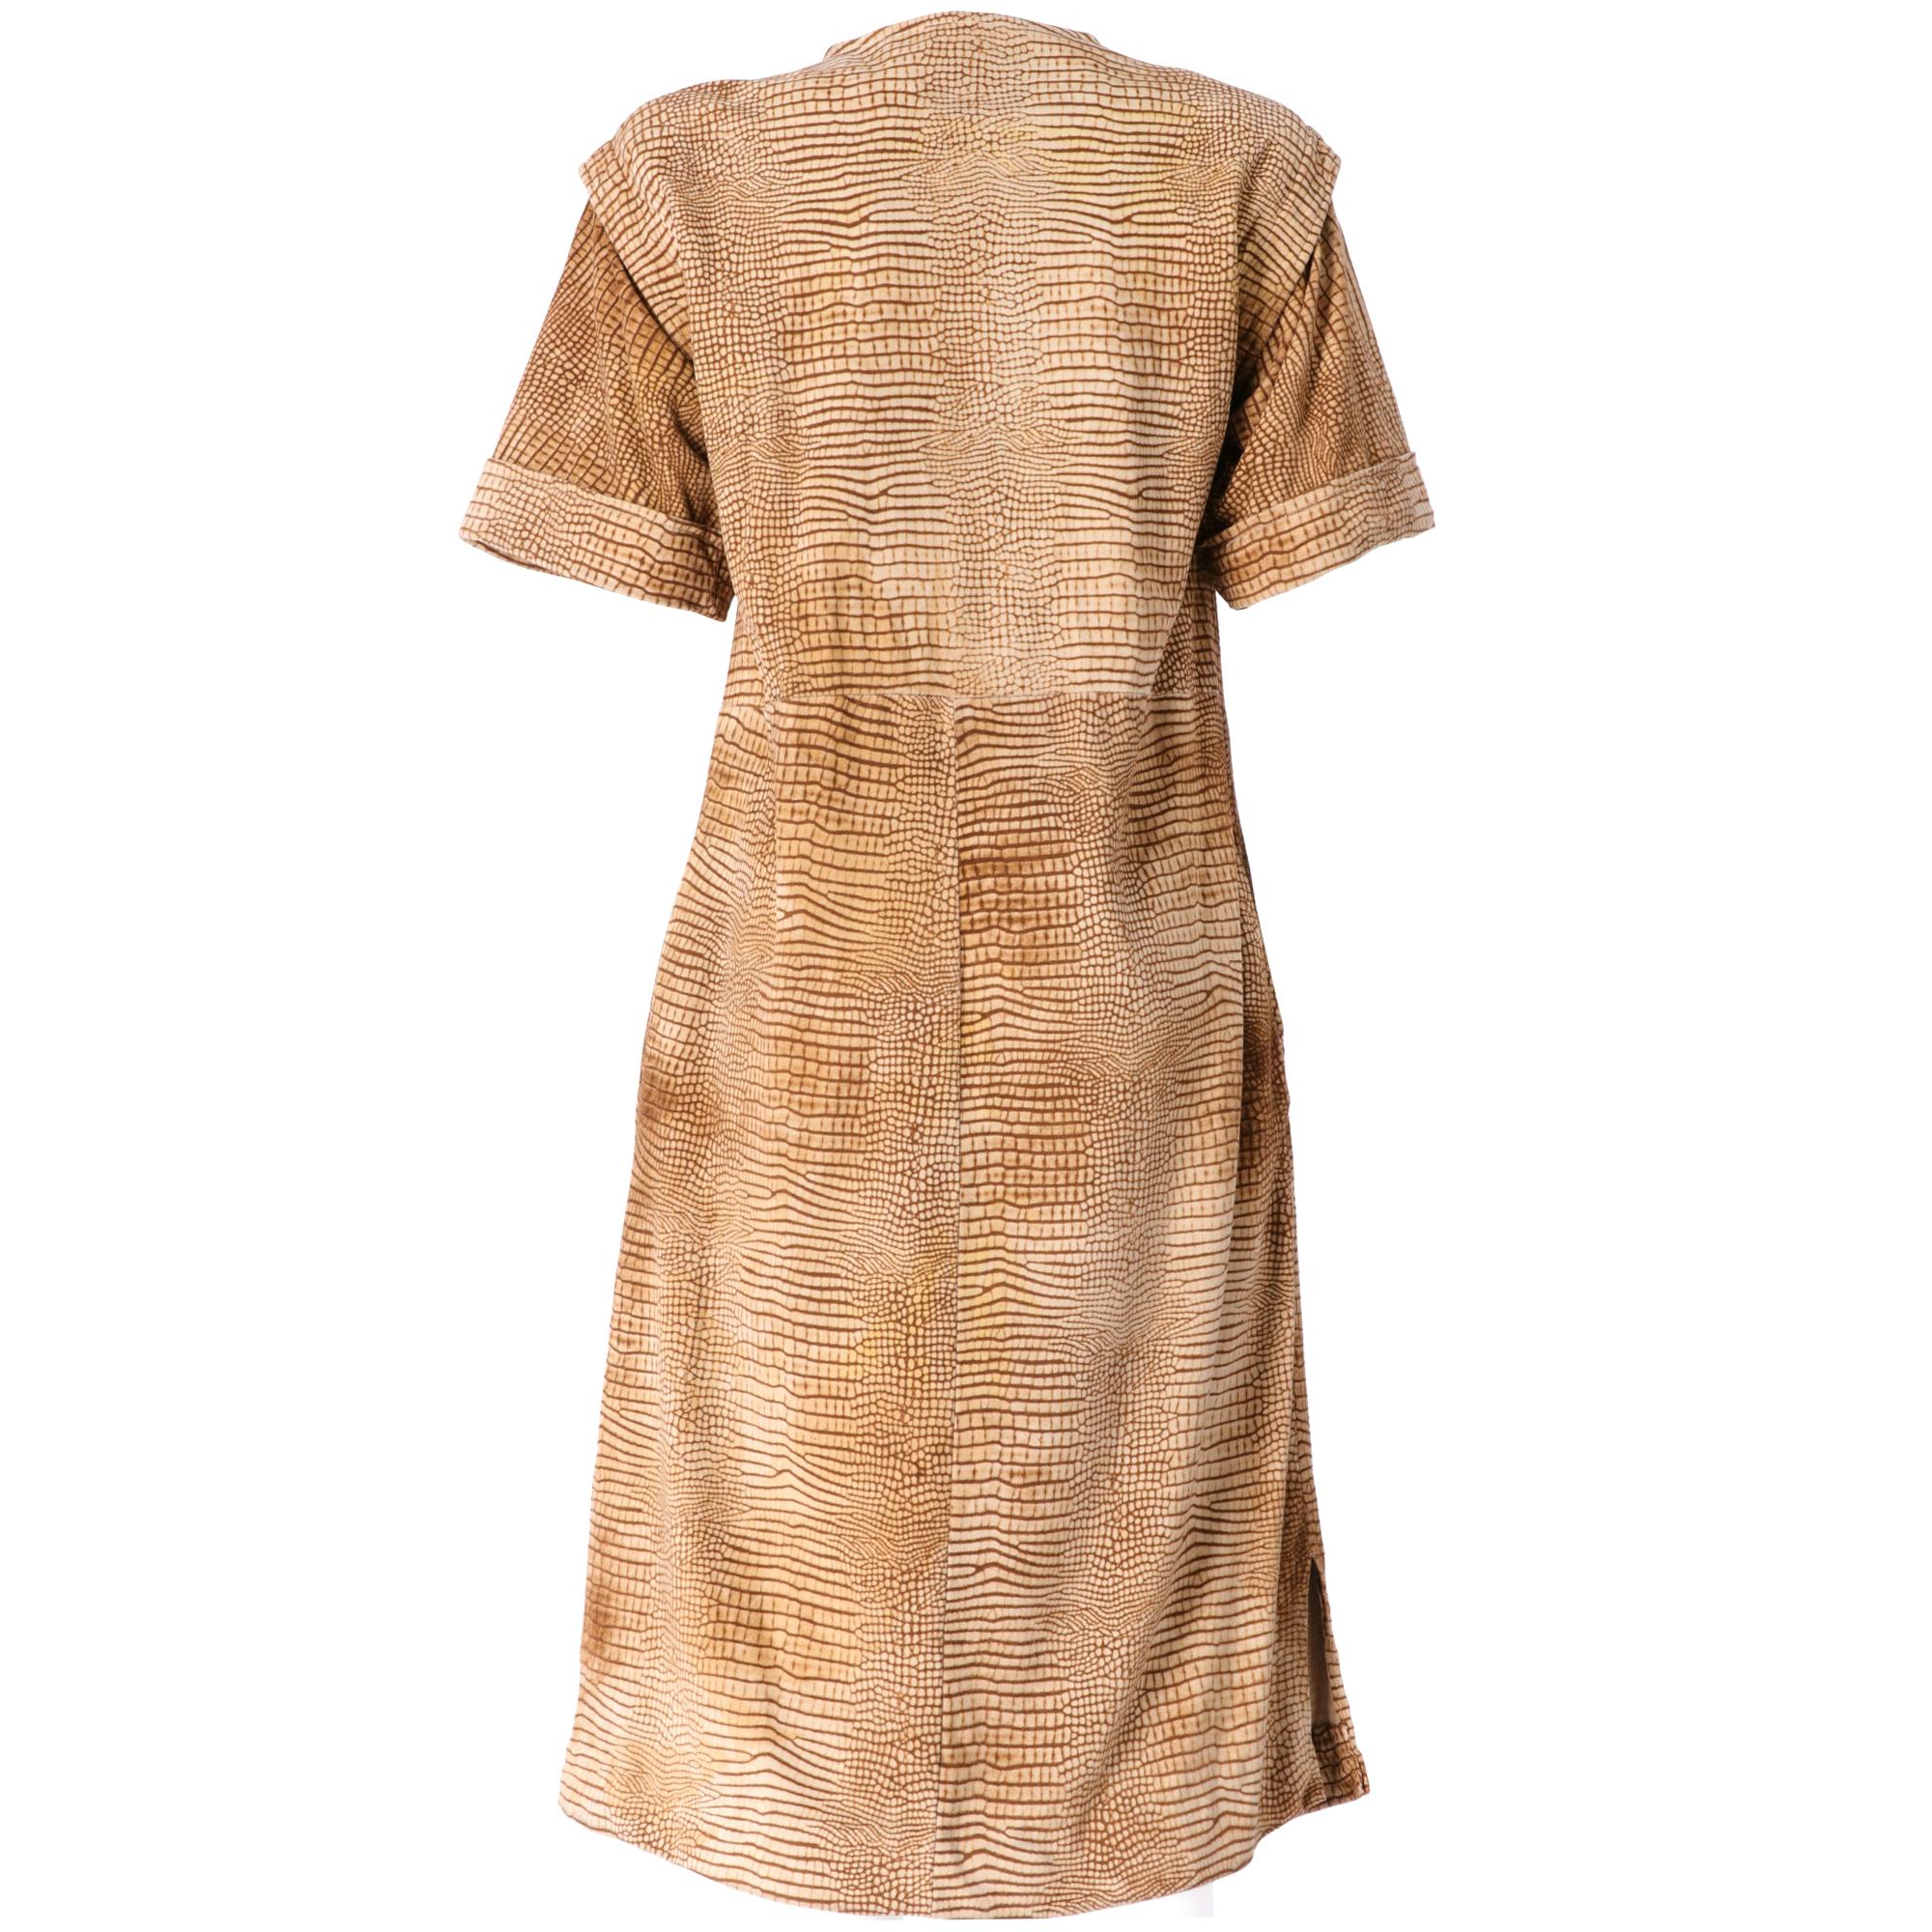 Castioni straight midi dress, in genuine beige suede with a brown animalier print, seraph collar with button closure, short cuffed sleeves, padded shoulders, side inseam pockets and side slits at the hem. Loose fit.
The item shows slight signs of